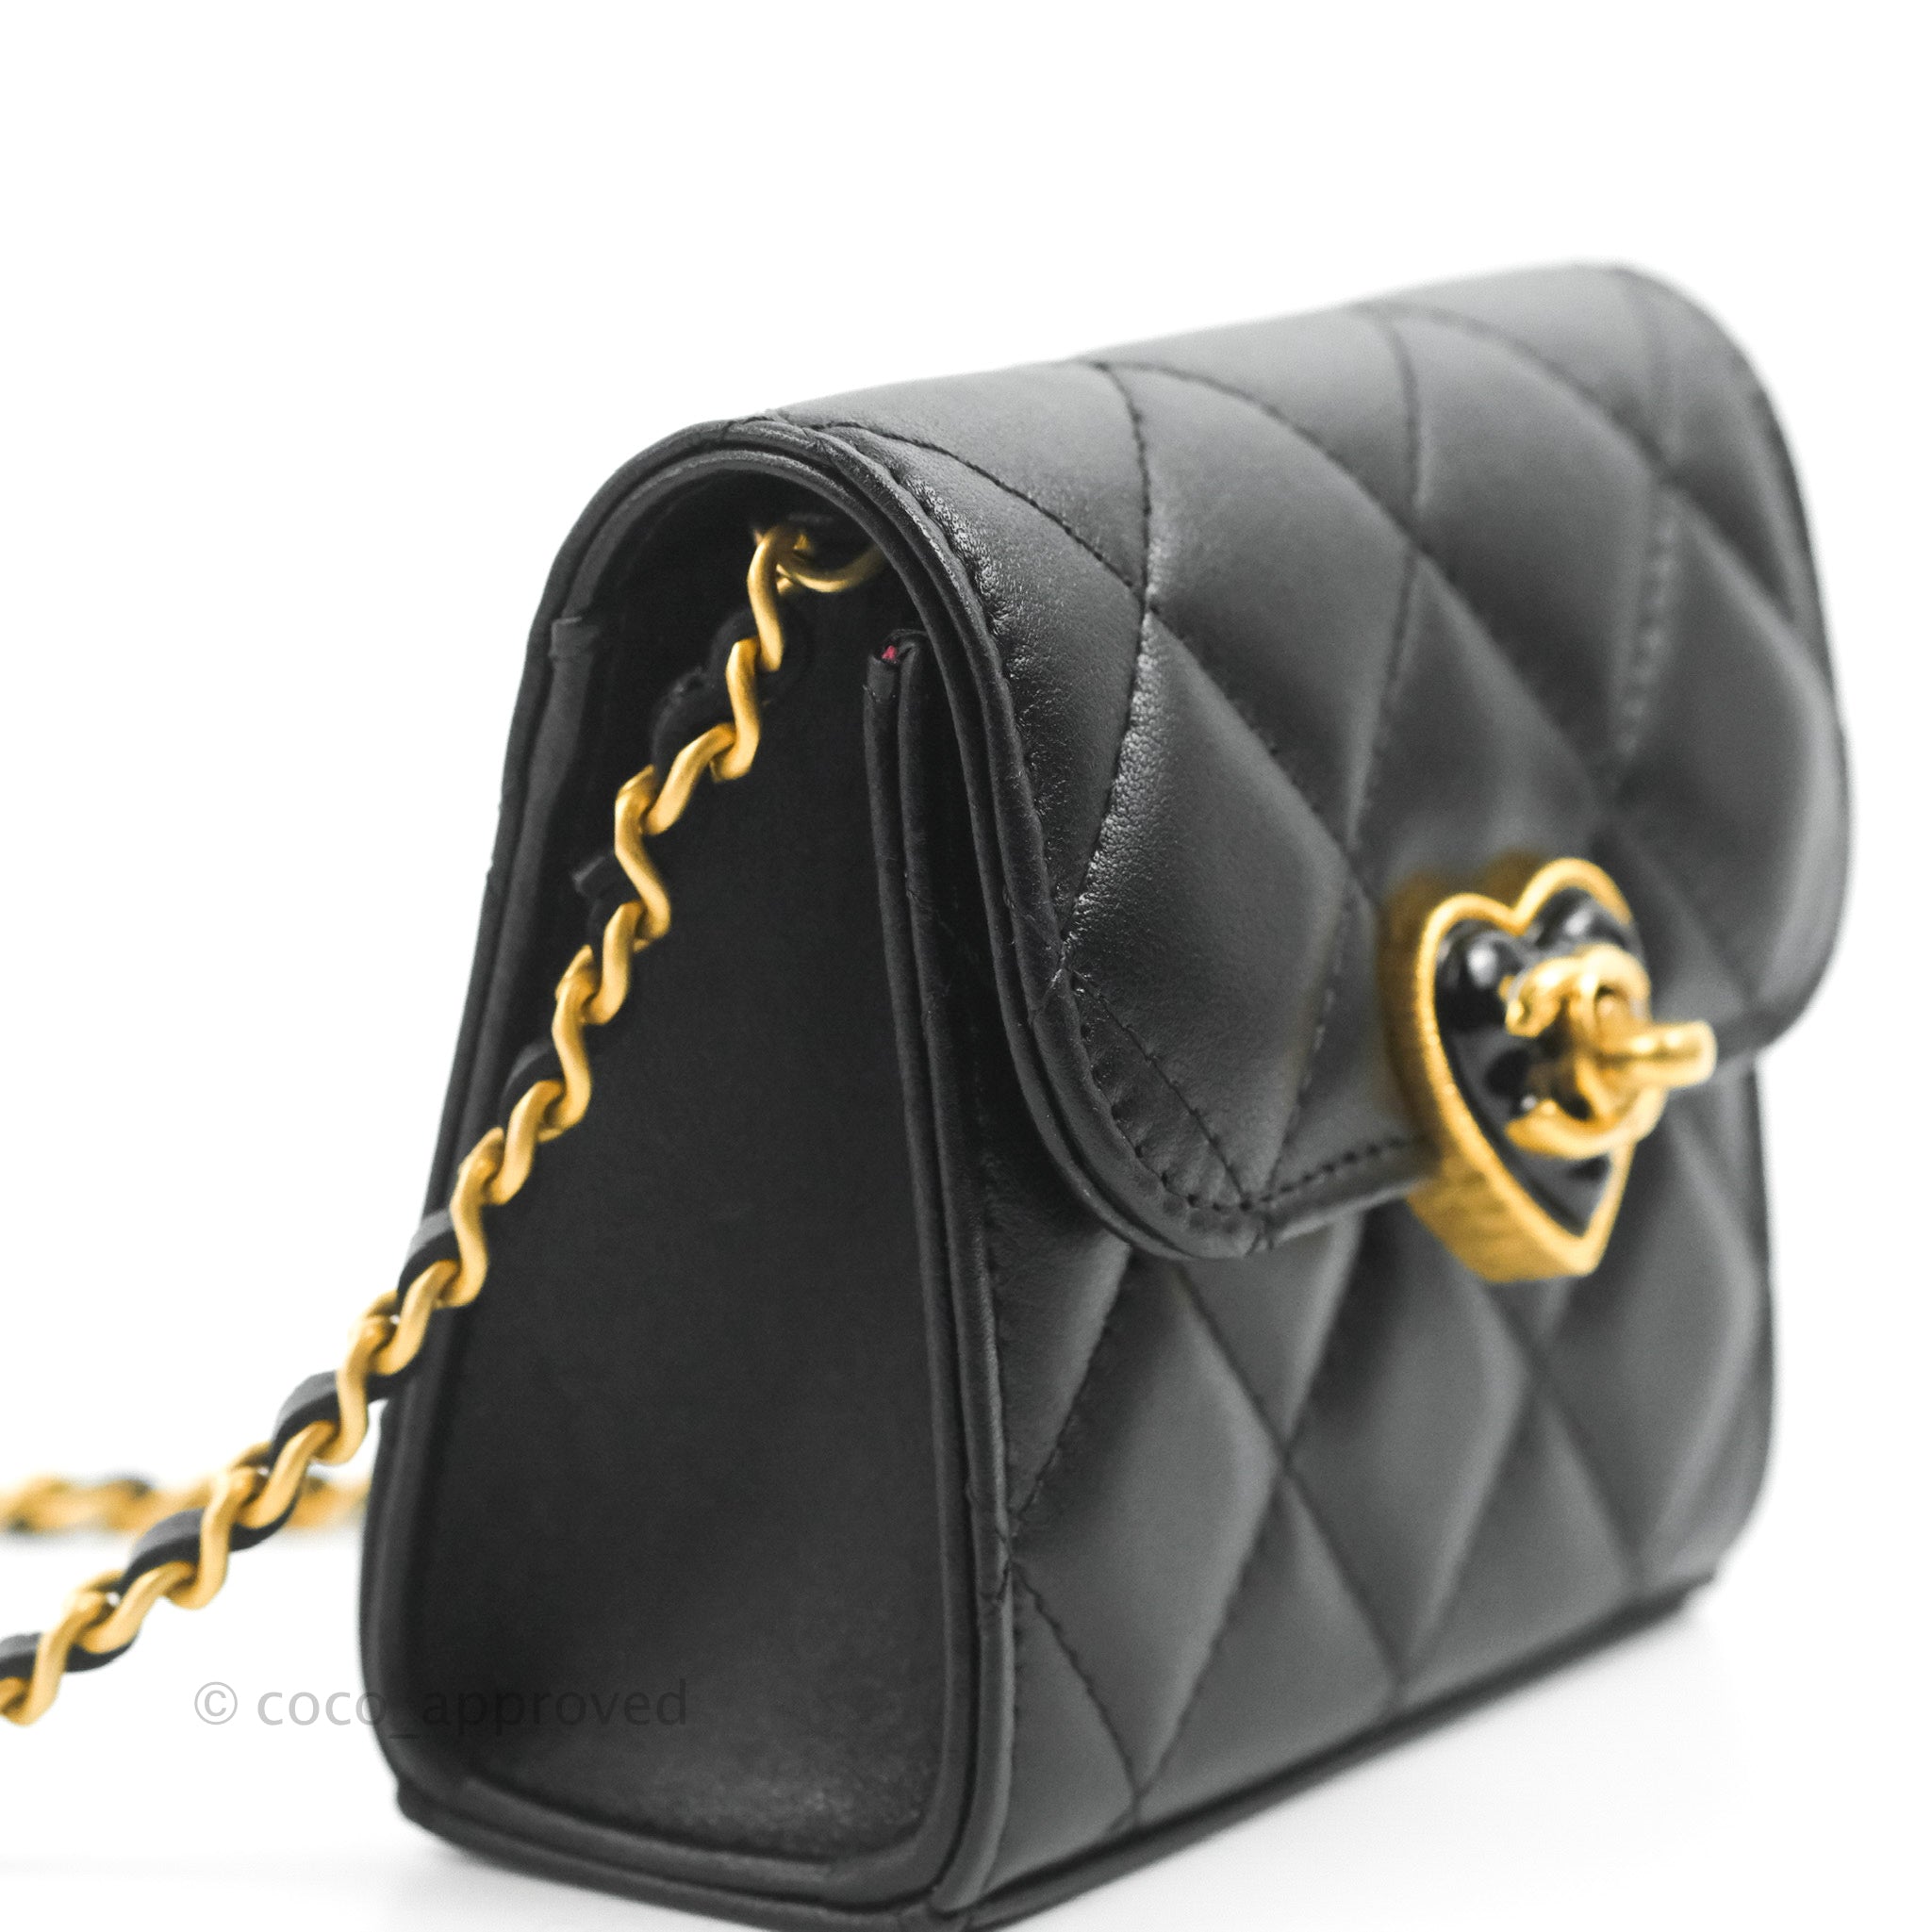 Chanel Small Heart Coin Purse Necklace Black Lambskin Gold Hardware 22 –  Coco Approved Studio